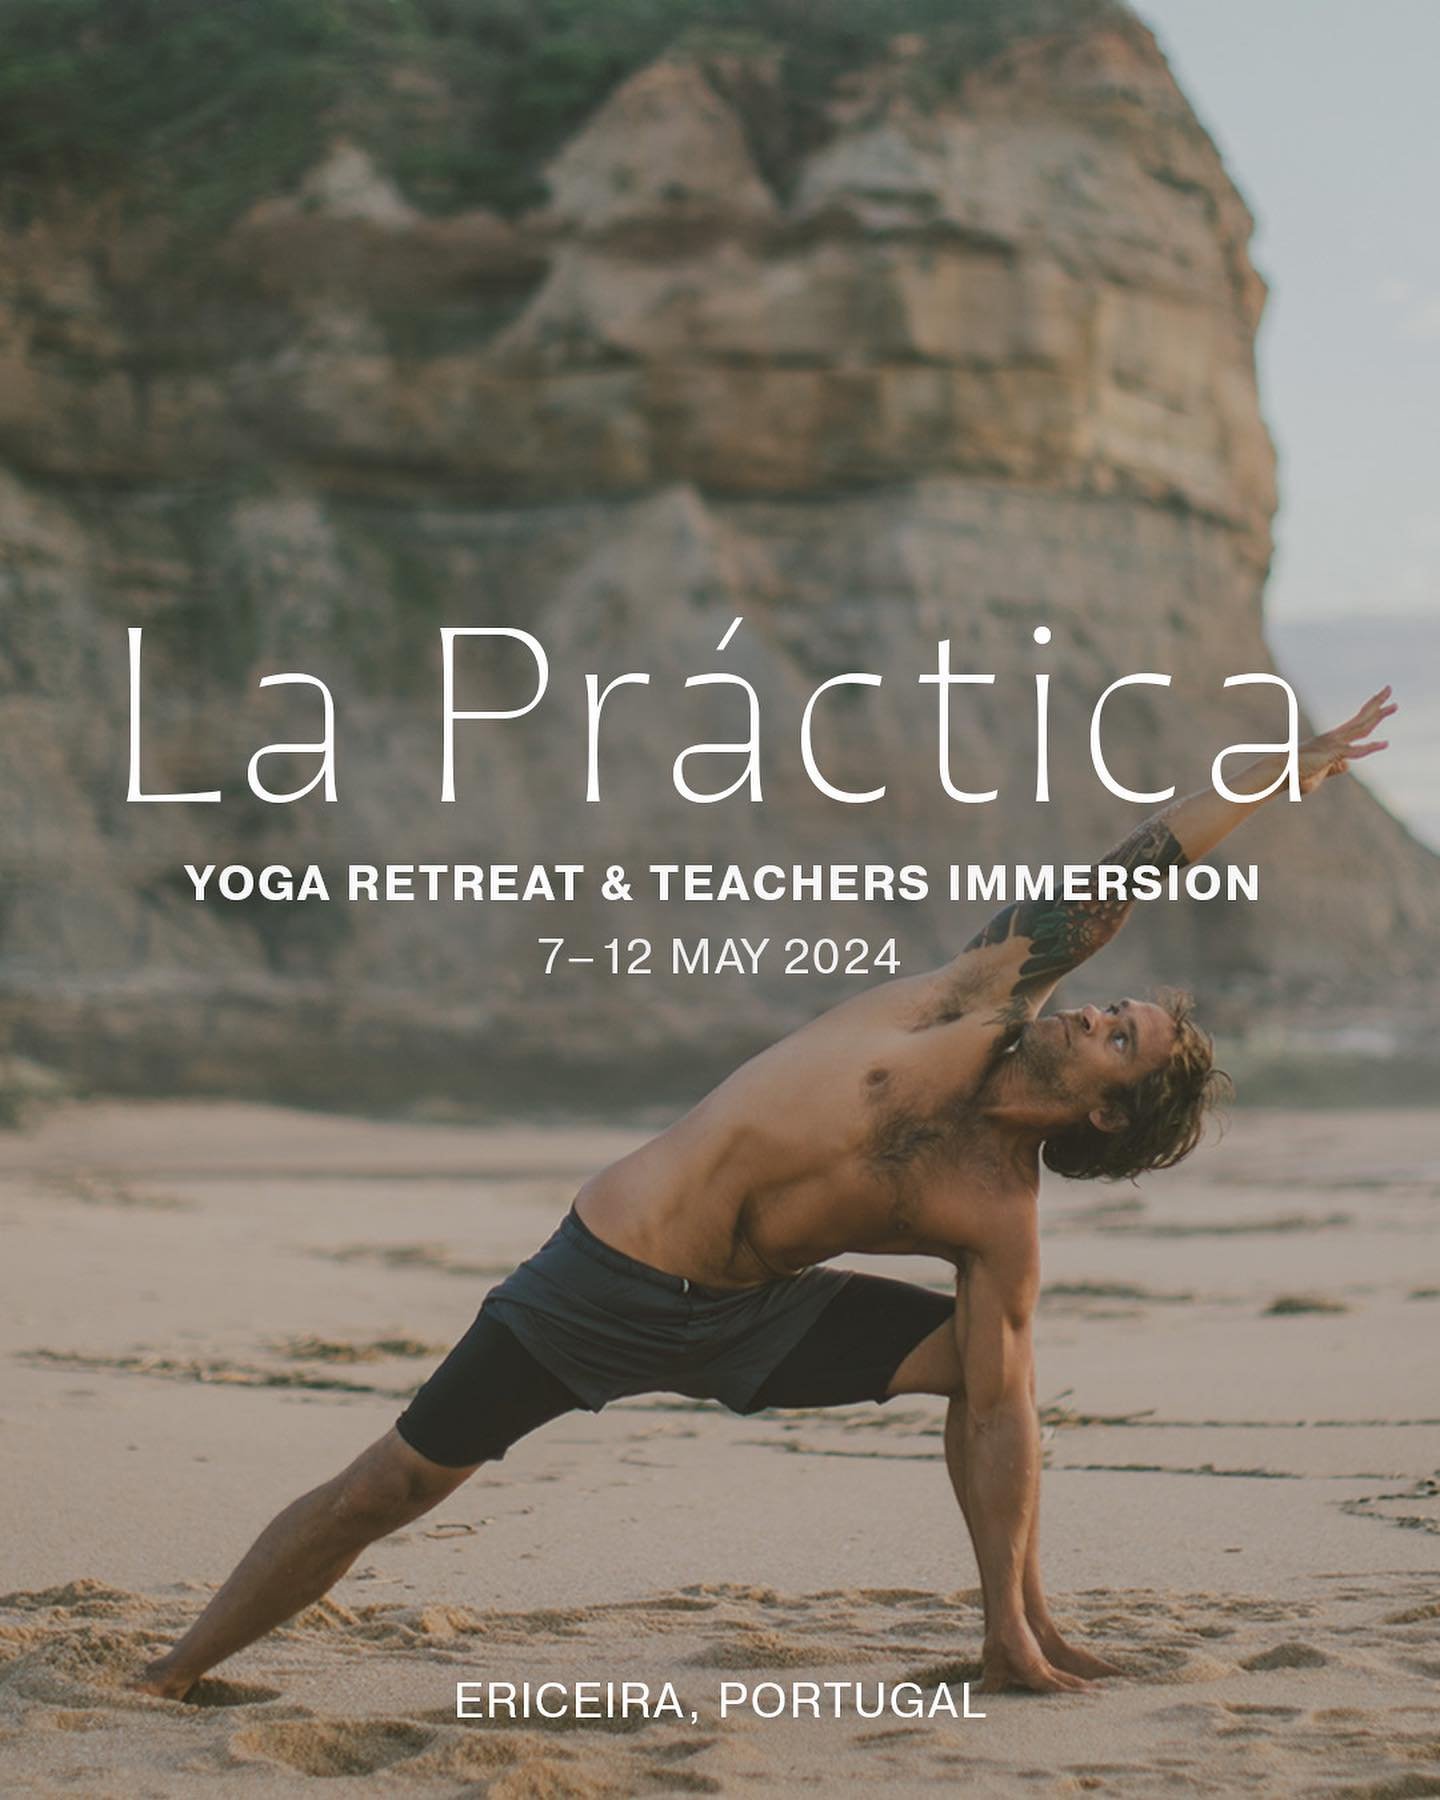 If you&rsquo;re like us - loving sunshine ☀️, juicy strong Vinyasa 💪, the ocean 🌊, good food 🥑 and you want to fill up your own cup ☕️ as a yoga practitioner or teacher - this retreat is for you!

We&rsquo;ve still got a few spots left if the abov